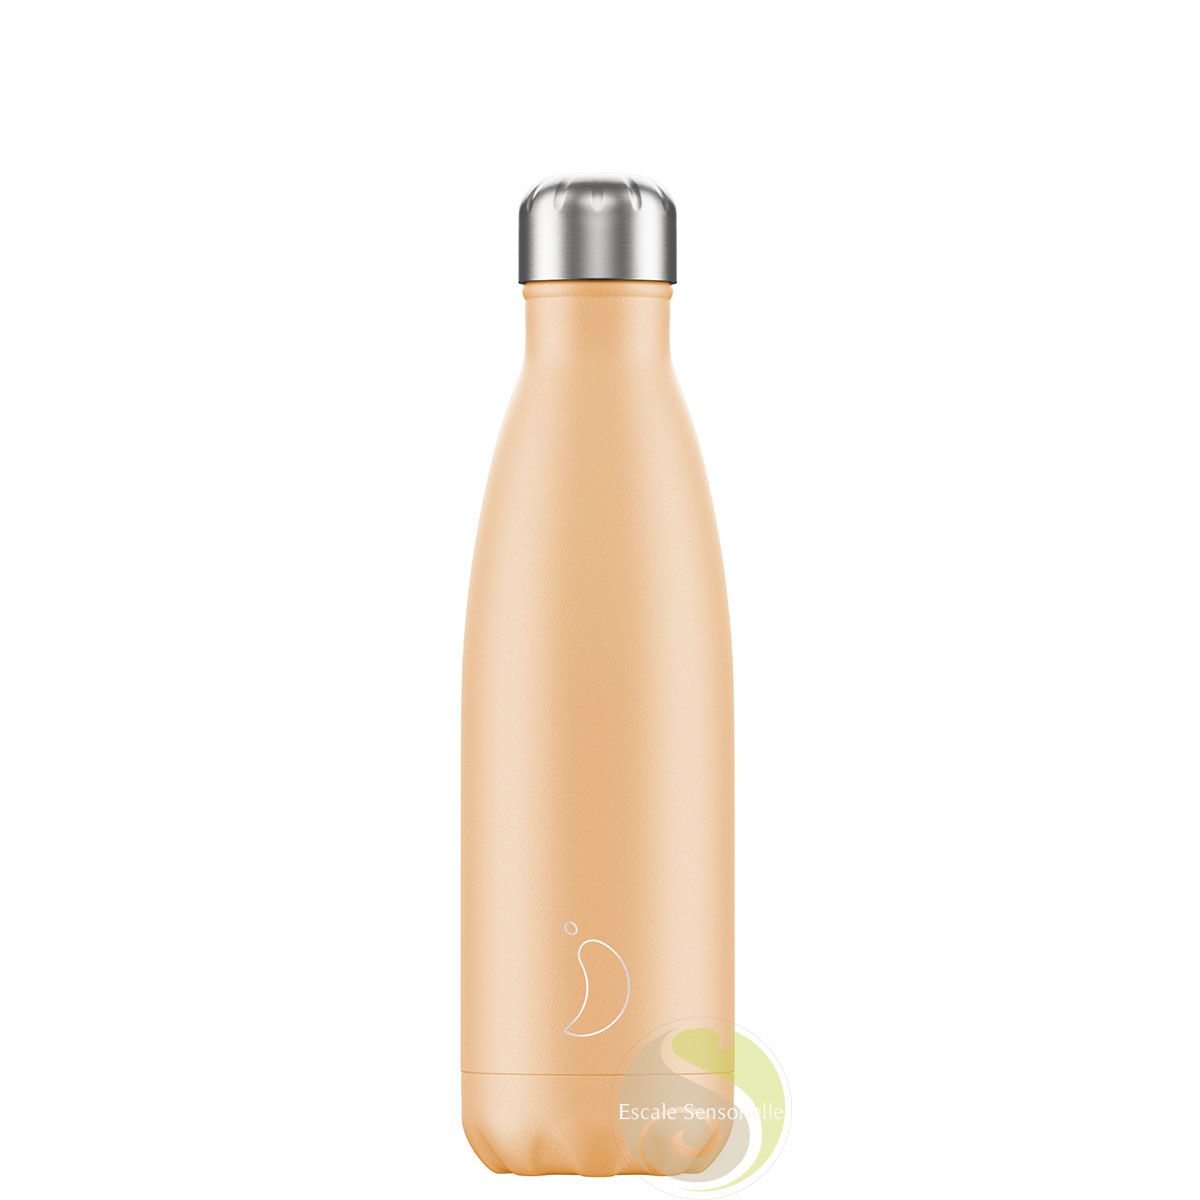 Contenant isotherme Chilli's bottle bouteille thermos 500ml nomade pastel orange